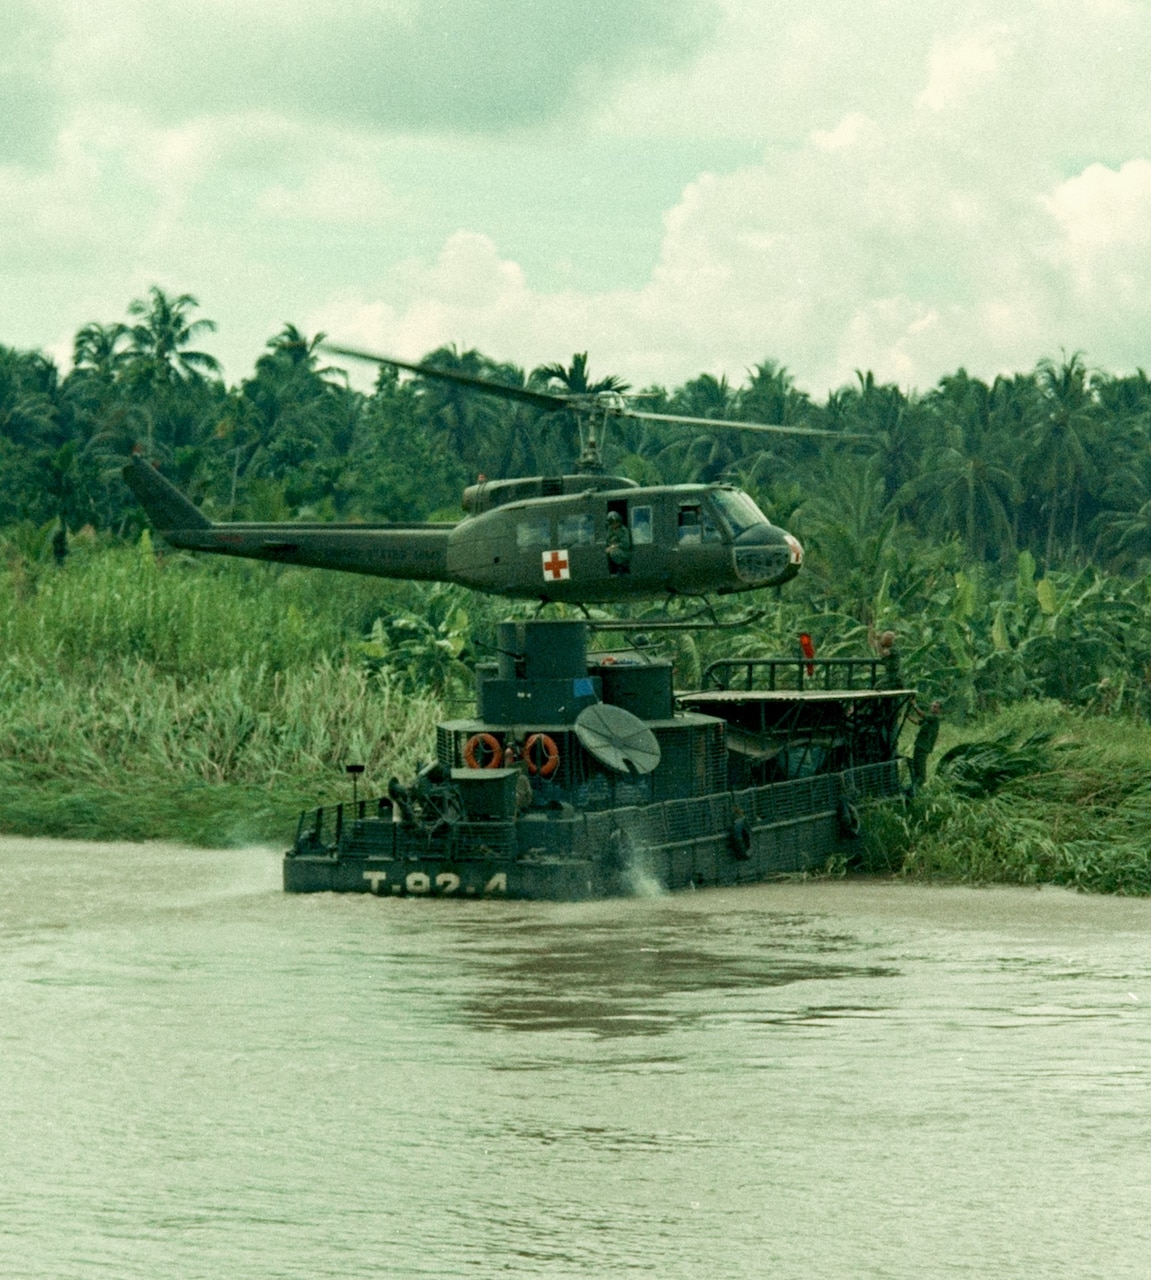 A helicopter lands on a helipad on a small boat beached near a jungle.